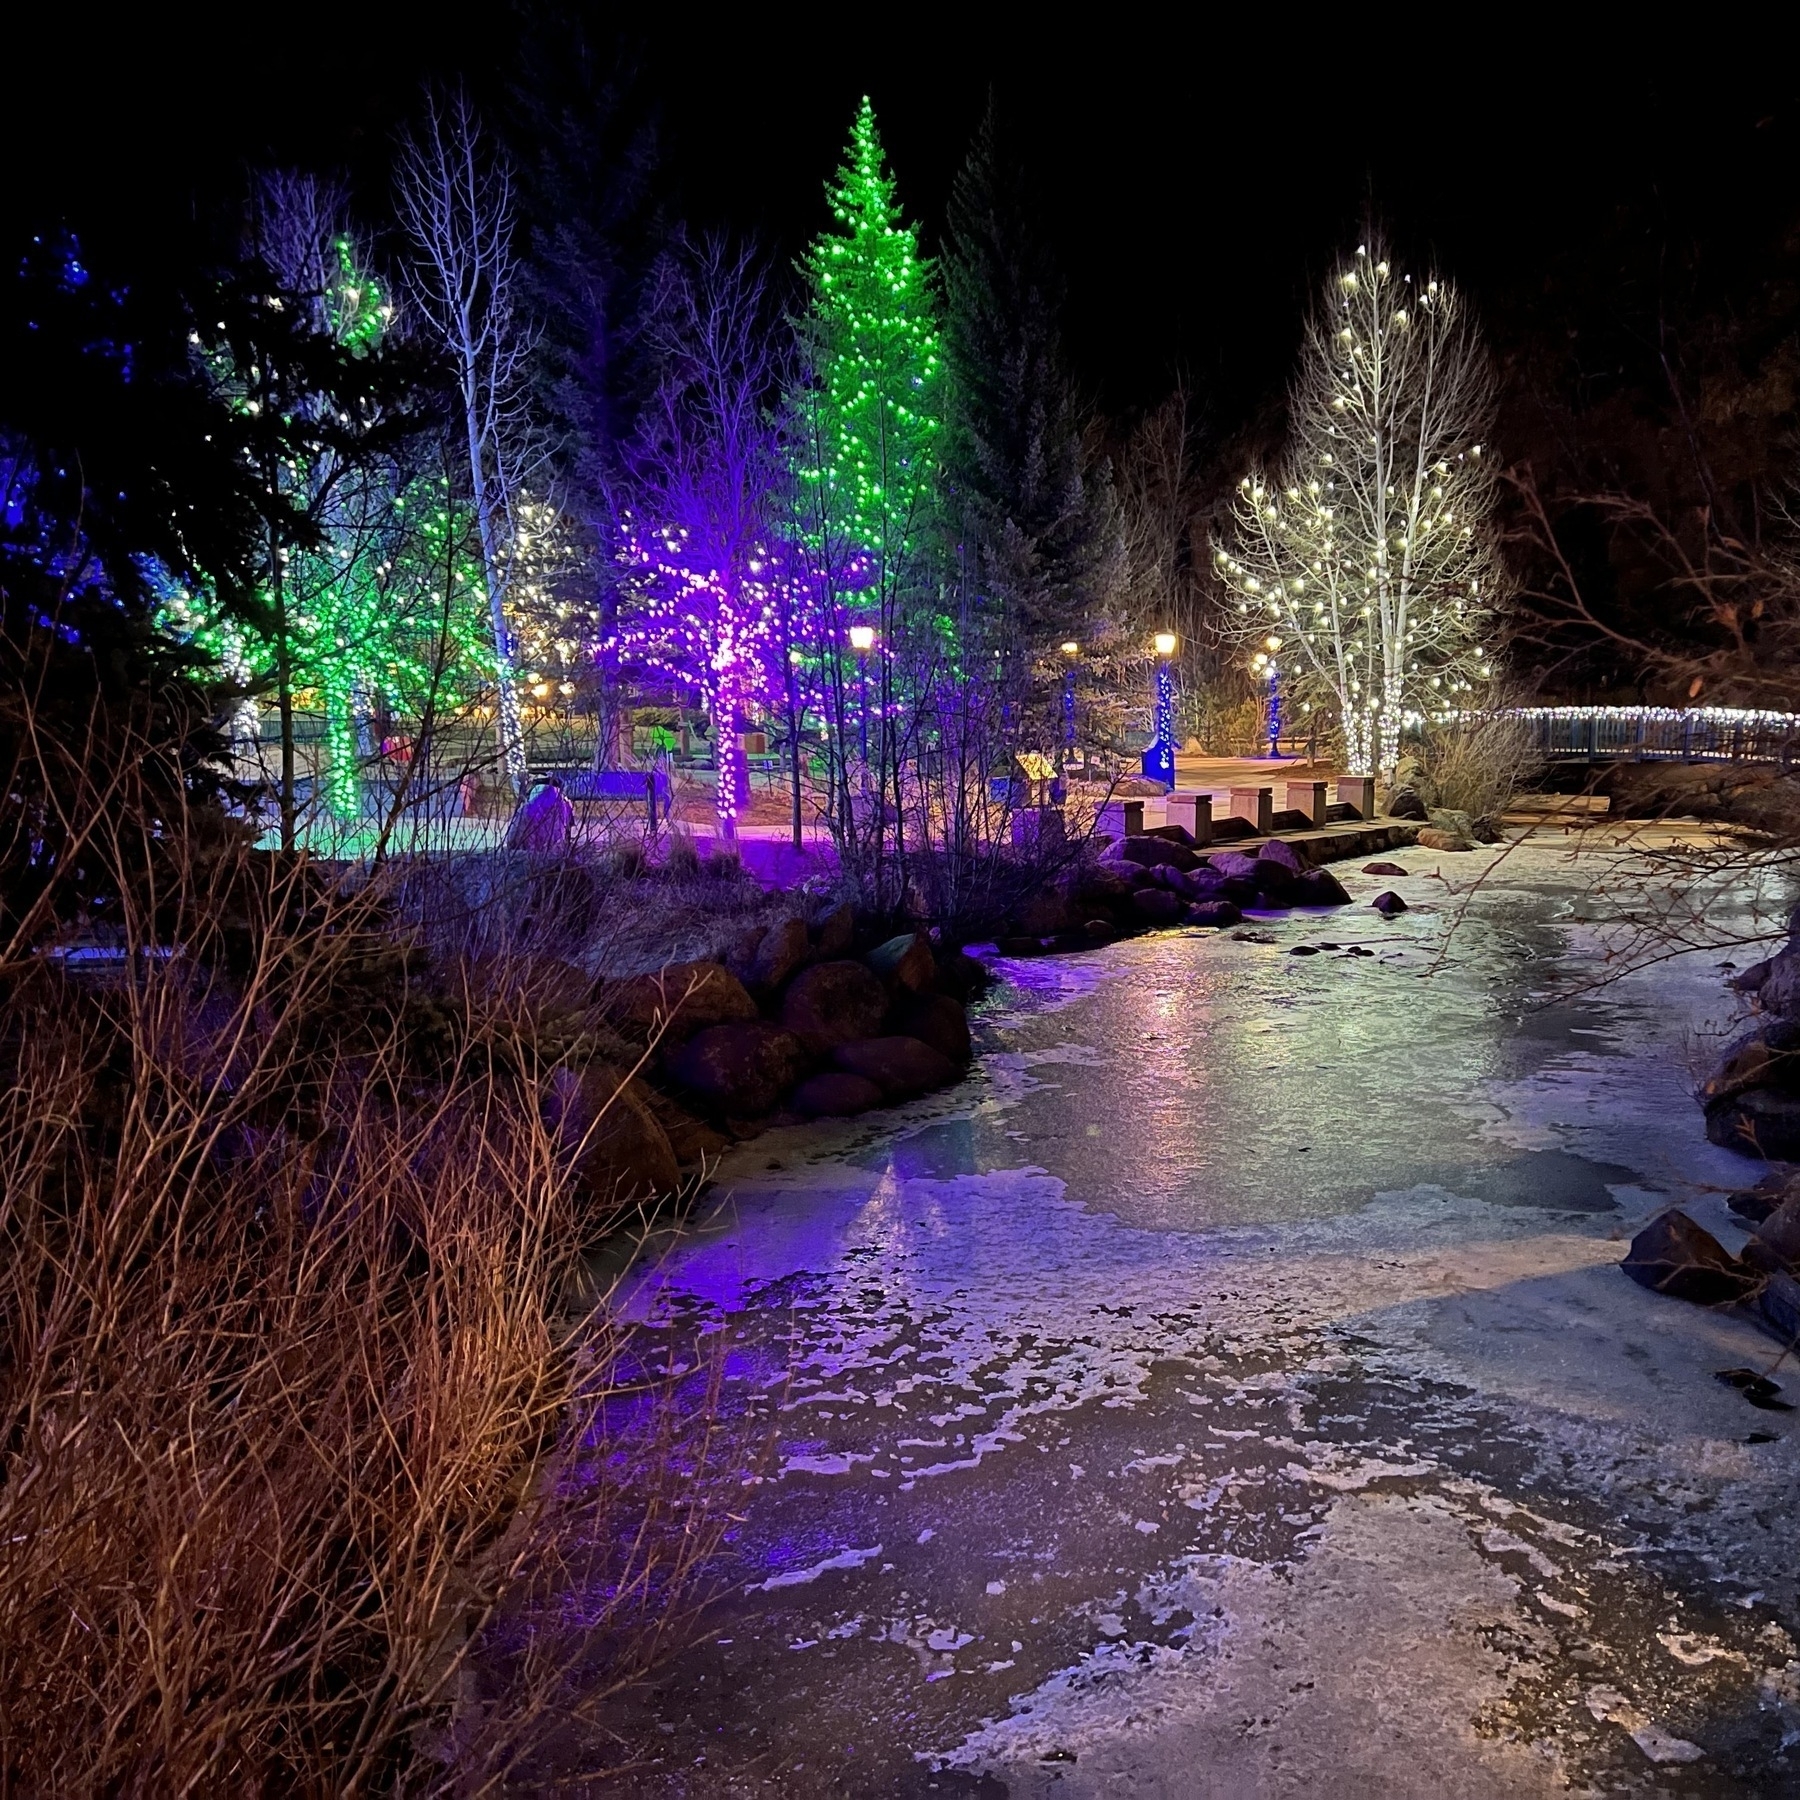 A partially frozen river bending in front of lighted trees at night.